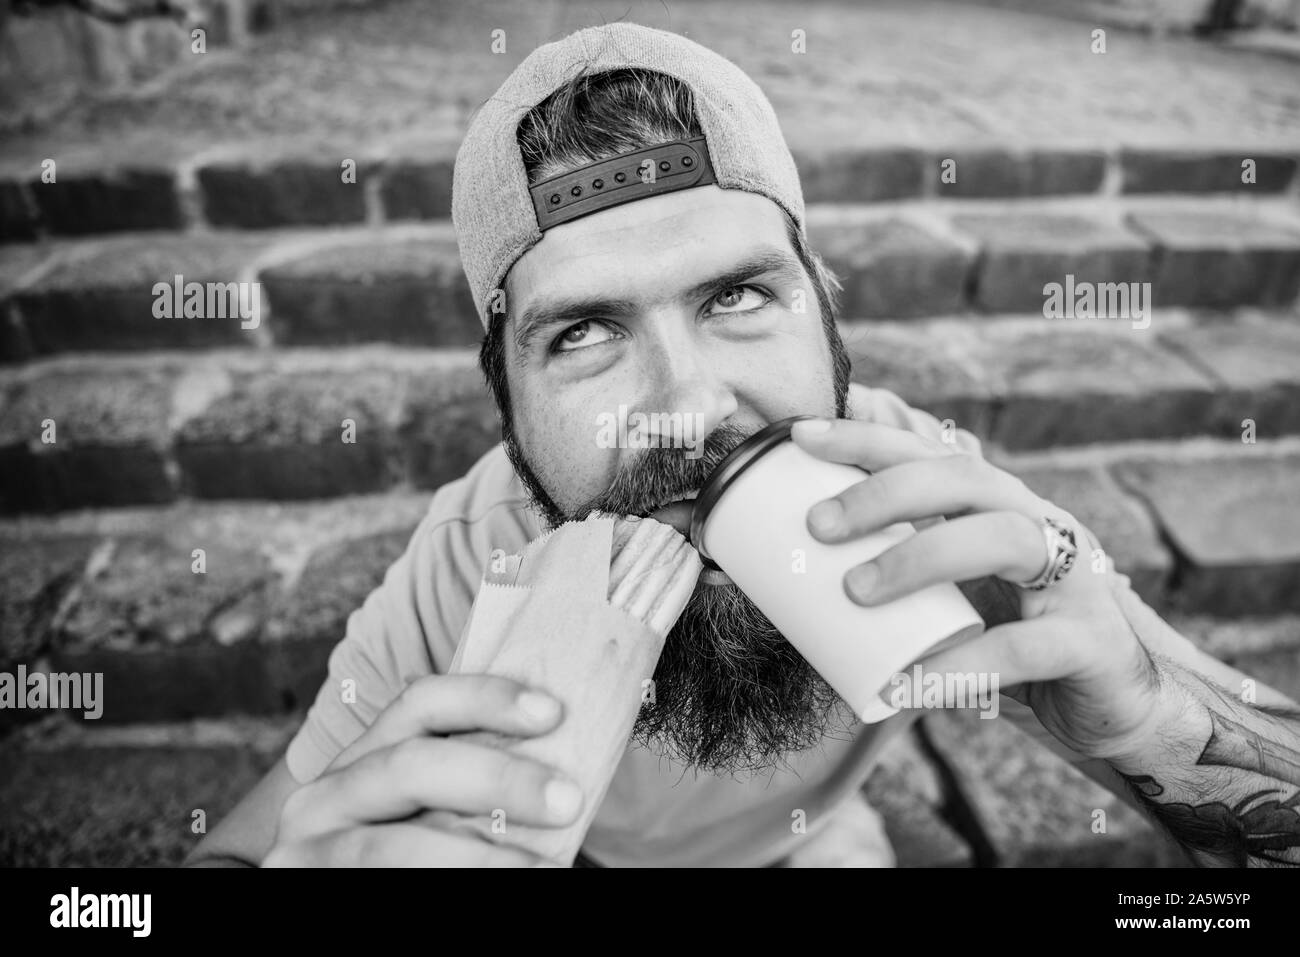 Man bearded eat tasty sausage. Urban lifestyle nutrition. Junk food. Carefree hipster eat junk food while sit stairs. Guy eating hot dog. Snack for good mood. Unleashed appetite. Street food concept. Stock Photo